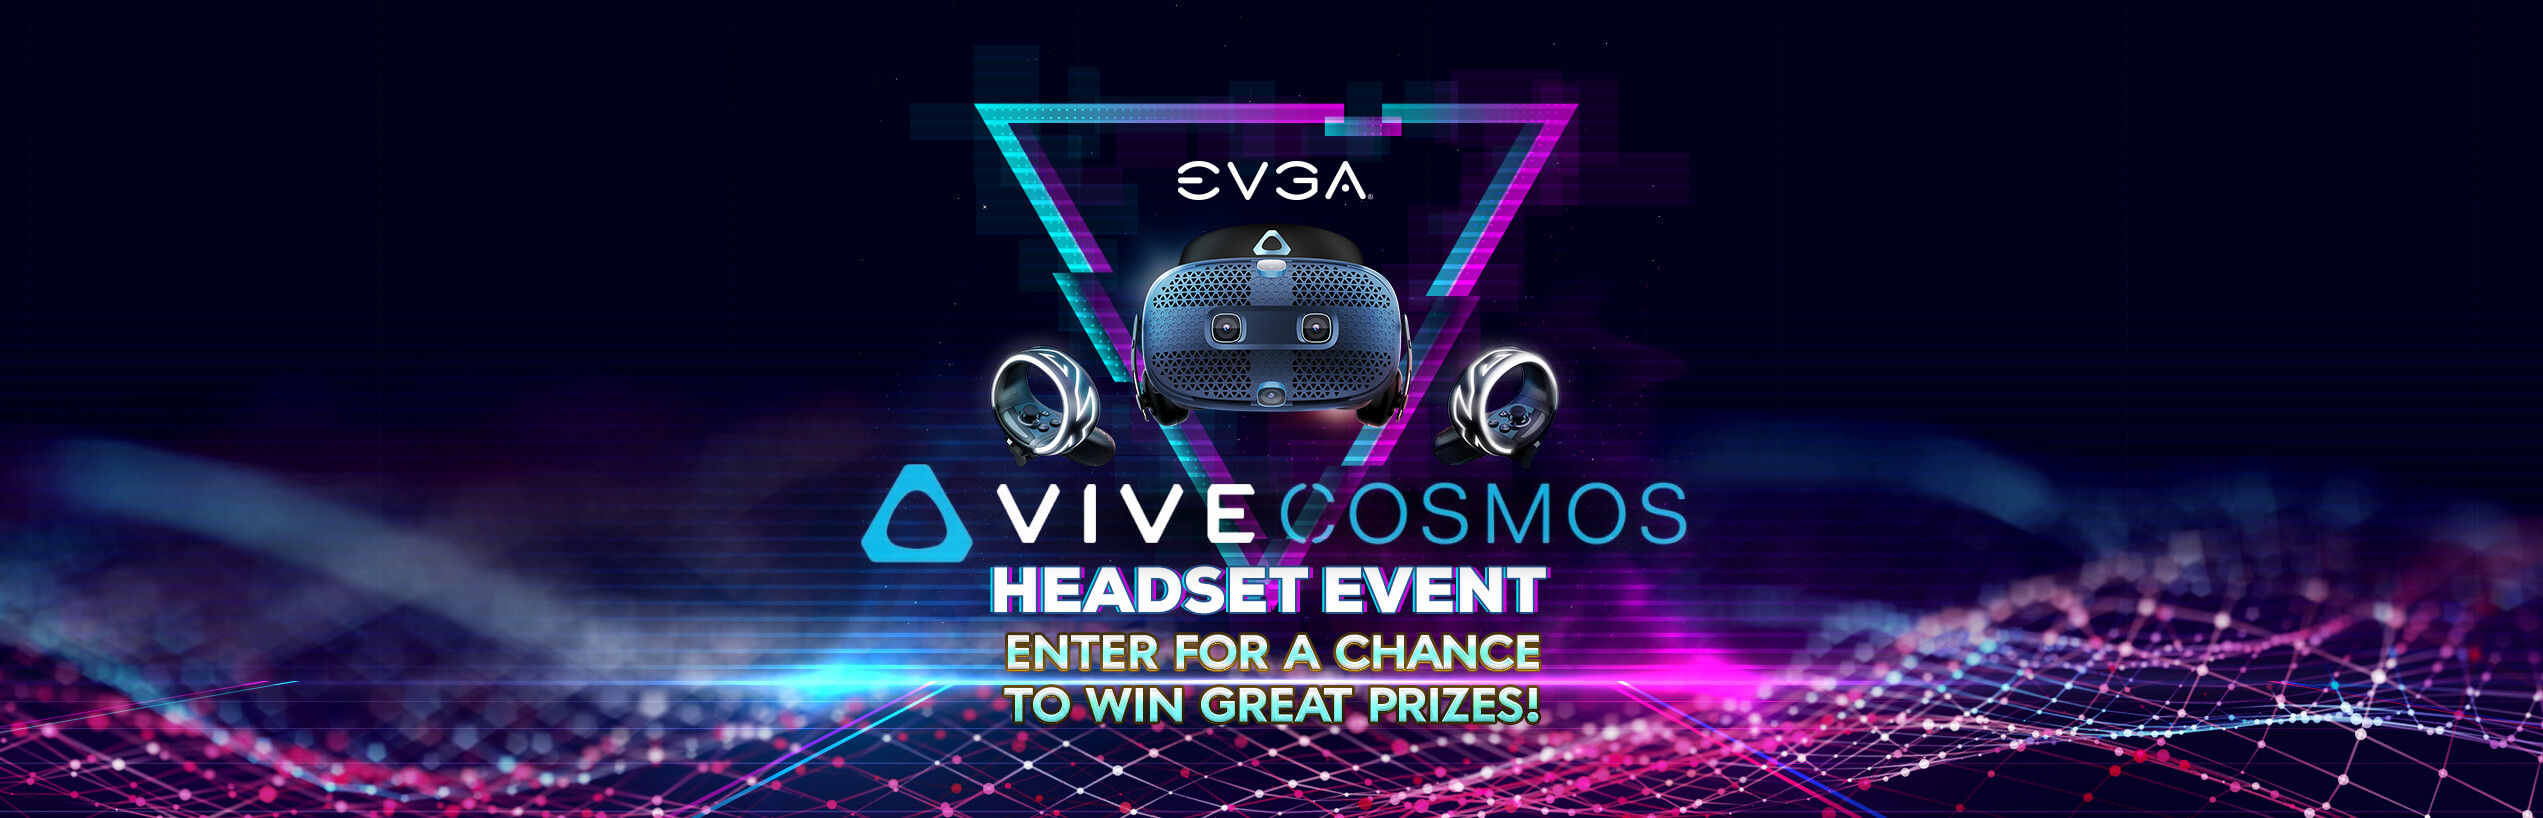 HTC Vive Cosmos Headsets Giveaway Event